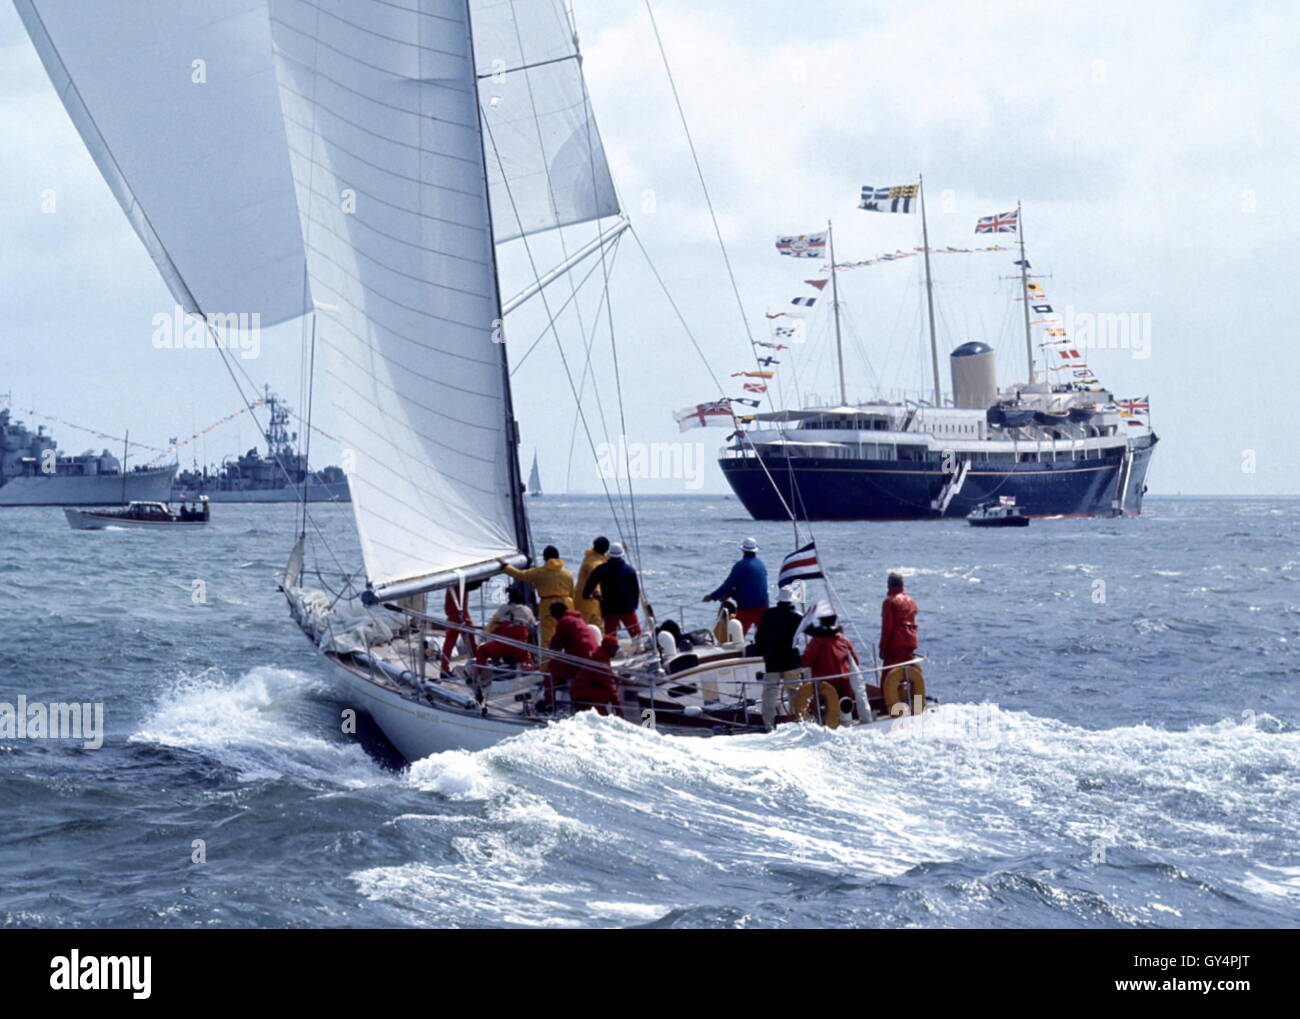 AJAX NEWS PHOTOS. 1971. SOLENT, ENGLAND. - ADMIRAL'S CUP - AMERICAN ENTRY YANKEE GIRL POWERS TOWARD COWES ROADS WITH THE ROYAL YACHT HMRY BRITANNIA AND NAVAL GUARDSHIPS IN BACKGROUND. PHOTO:JONATHAN EASTLAND/AJAX REF:C7105D6 3 Stock Photo